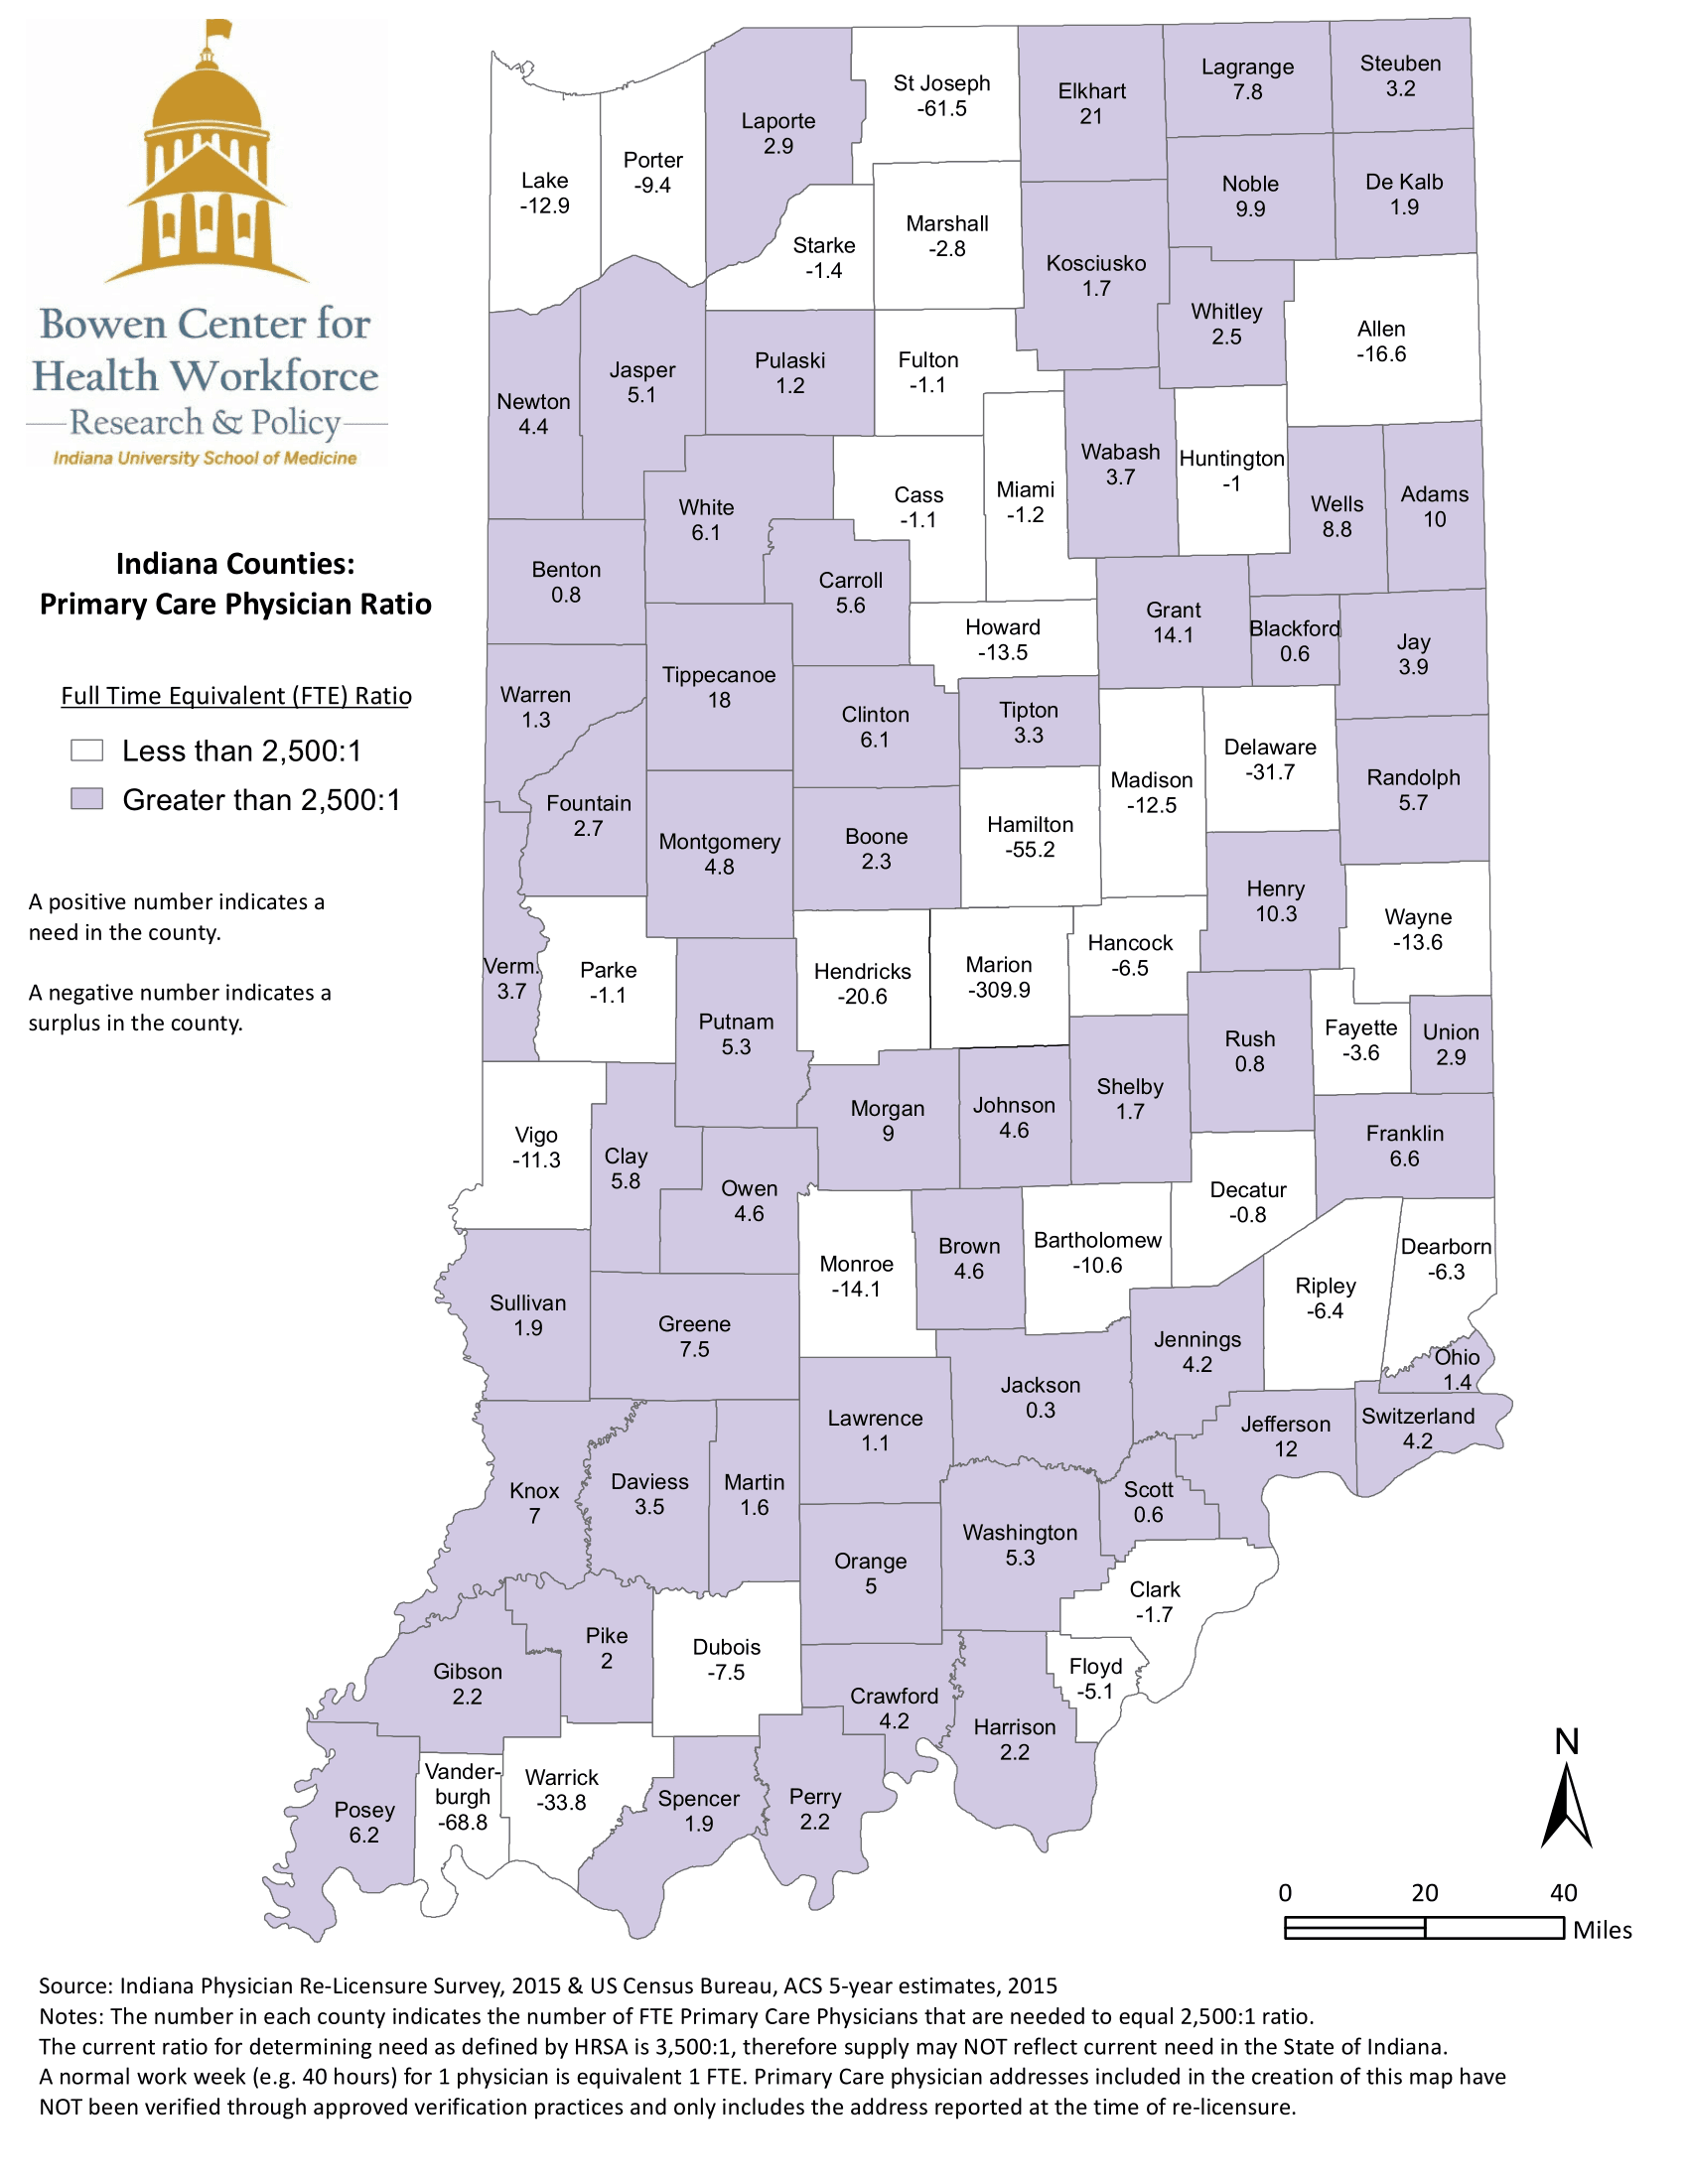 This map illustrates the geographic distribution of Indiana’s primary care physician workforce by mapping the population to primary care physician full time equivalency ratio calculated from data collected during the 2015 Indiana physician renewal process. Source: IUSM PC Scholarship Ad Hoc